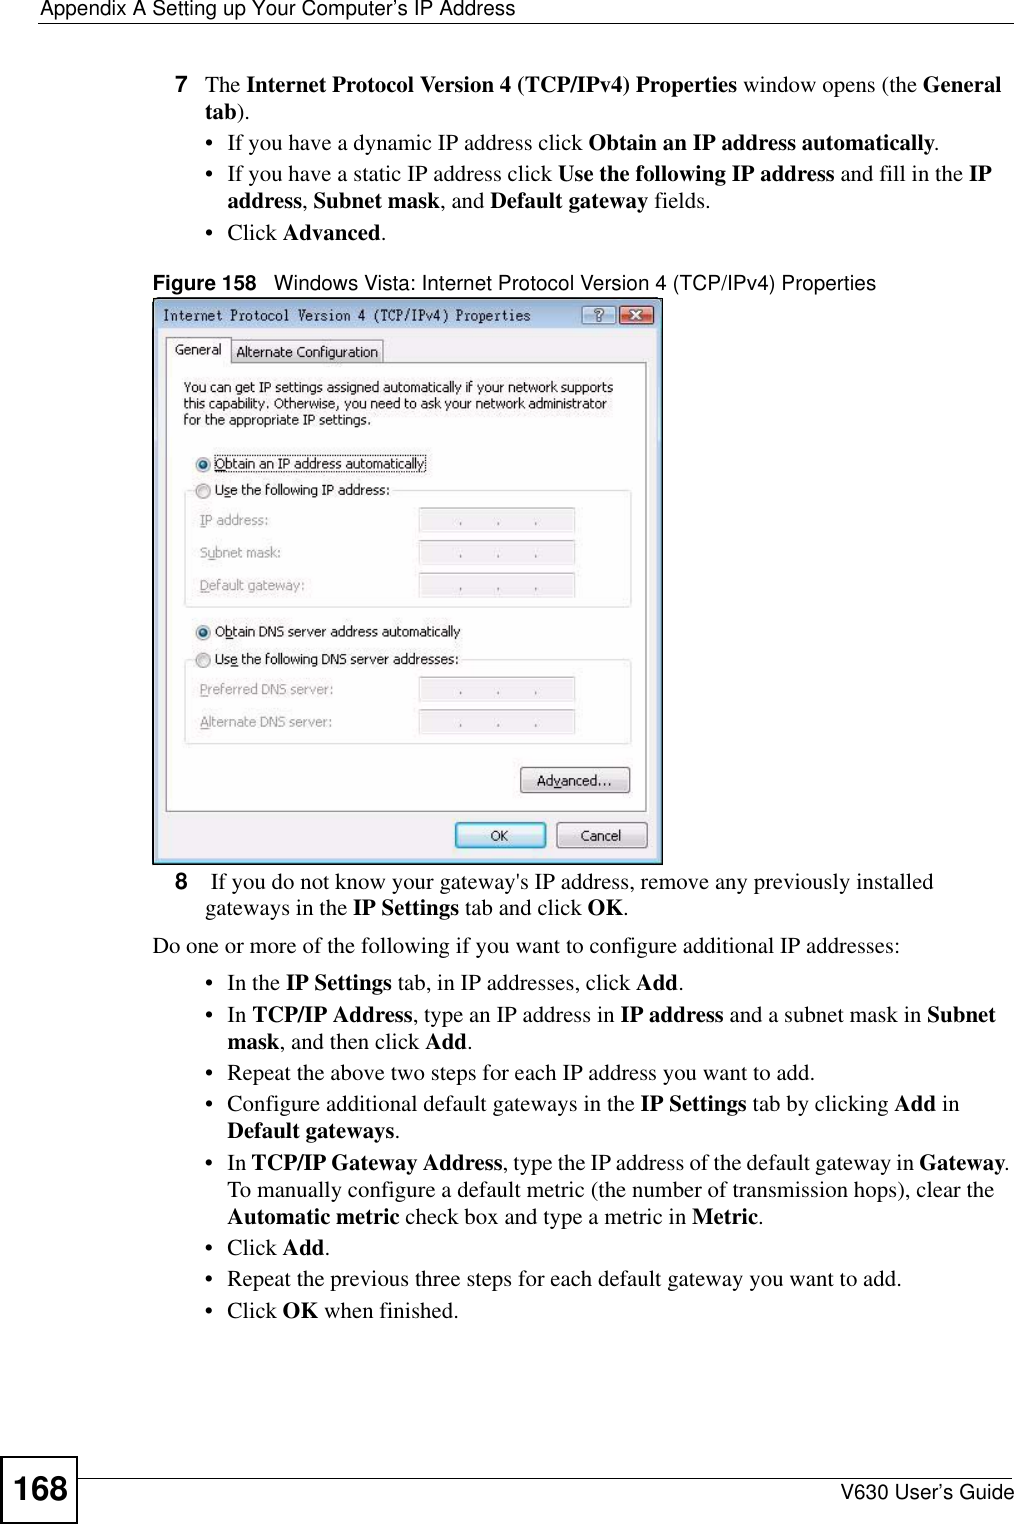 Appendix A Setting up Your Computer’s IP AddressV630 User’s Guide1687The Internet Protocol Version 4 (TCP/IPv4) Properties window opens (the General tab).• If you have a dynamic IP address click Obtain an IP address automatically.• If you have a static IP address click Use the following IP address and fill in the IP address, Subnet mask, and Default gateway fields. • Click Advanced.Figure 158   Windows Vista: Internet Protocol Version 4 (TCP/IPv4) Properties8 If you do not know your gateway&apos;s IP address, remove any previously installed gateways in the IP Settings tab and click OK.Do one or more of the following if you want to configure additional IP addresses:•In the IP Settings tab, in IP addresses, click Add.•In TCP/IP Address, type an IP address in IP address and a subnet mask in Subnet mask, and then click Add.• Repeat the above two steps for each IP address you want to add.• Configure additional default gateways in the IP Settings tab by clicking Add in Default gateways.•In TCP/IP Gateway Address, type the IP address of the default gateway in Gateway. To manually configure a default metric (the number of transmission hops), clear the Automatic metric check box and type a metric in Metric.• Click Add. • Repeat the previous three steps for each default gateway you want to add.• Click OK when finished.